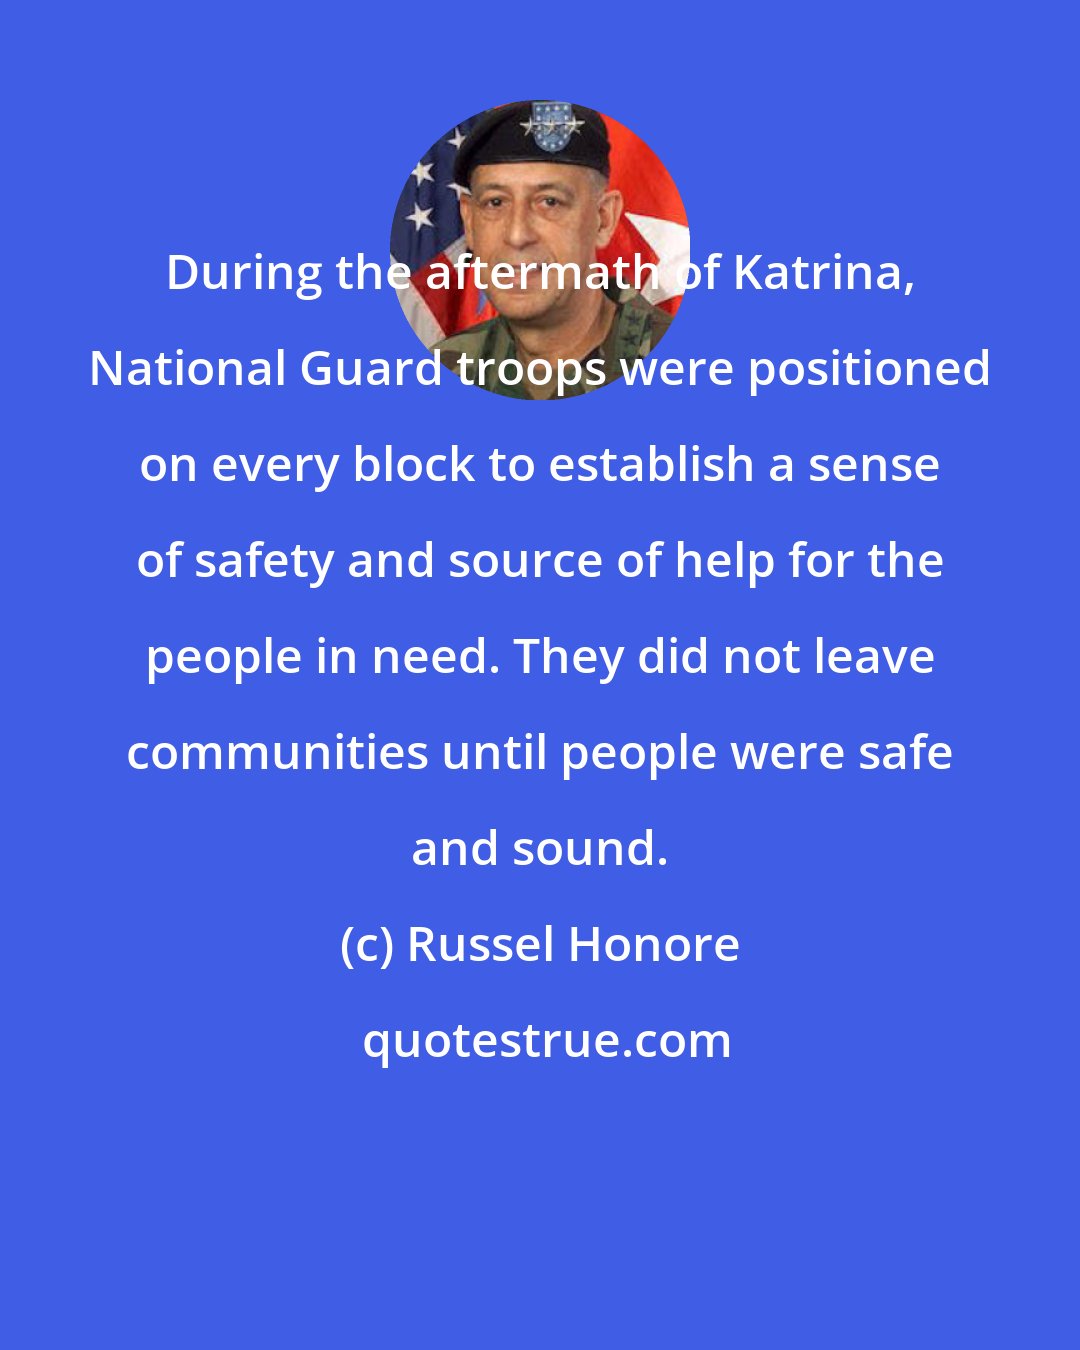 Russel Honore: During the aftermath of Katrina, National Guard troops were positioned on every block to establish a sense of safety and source of help for the people in need. They did not leave communities until people were safe and sound.